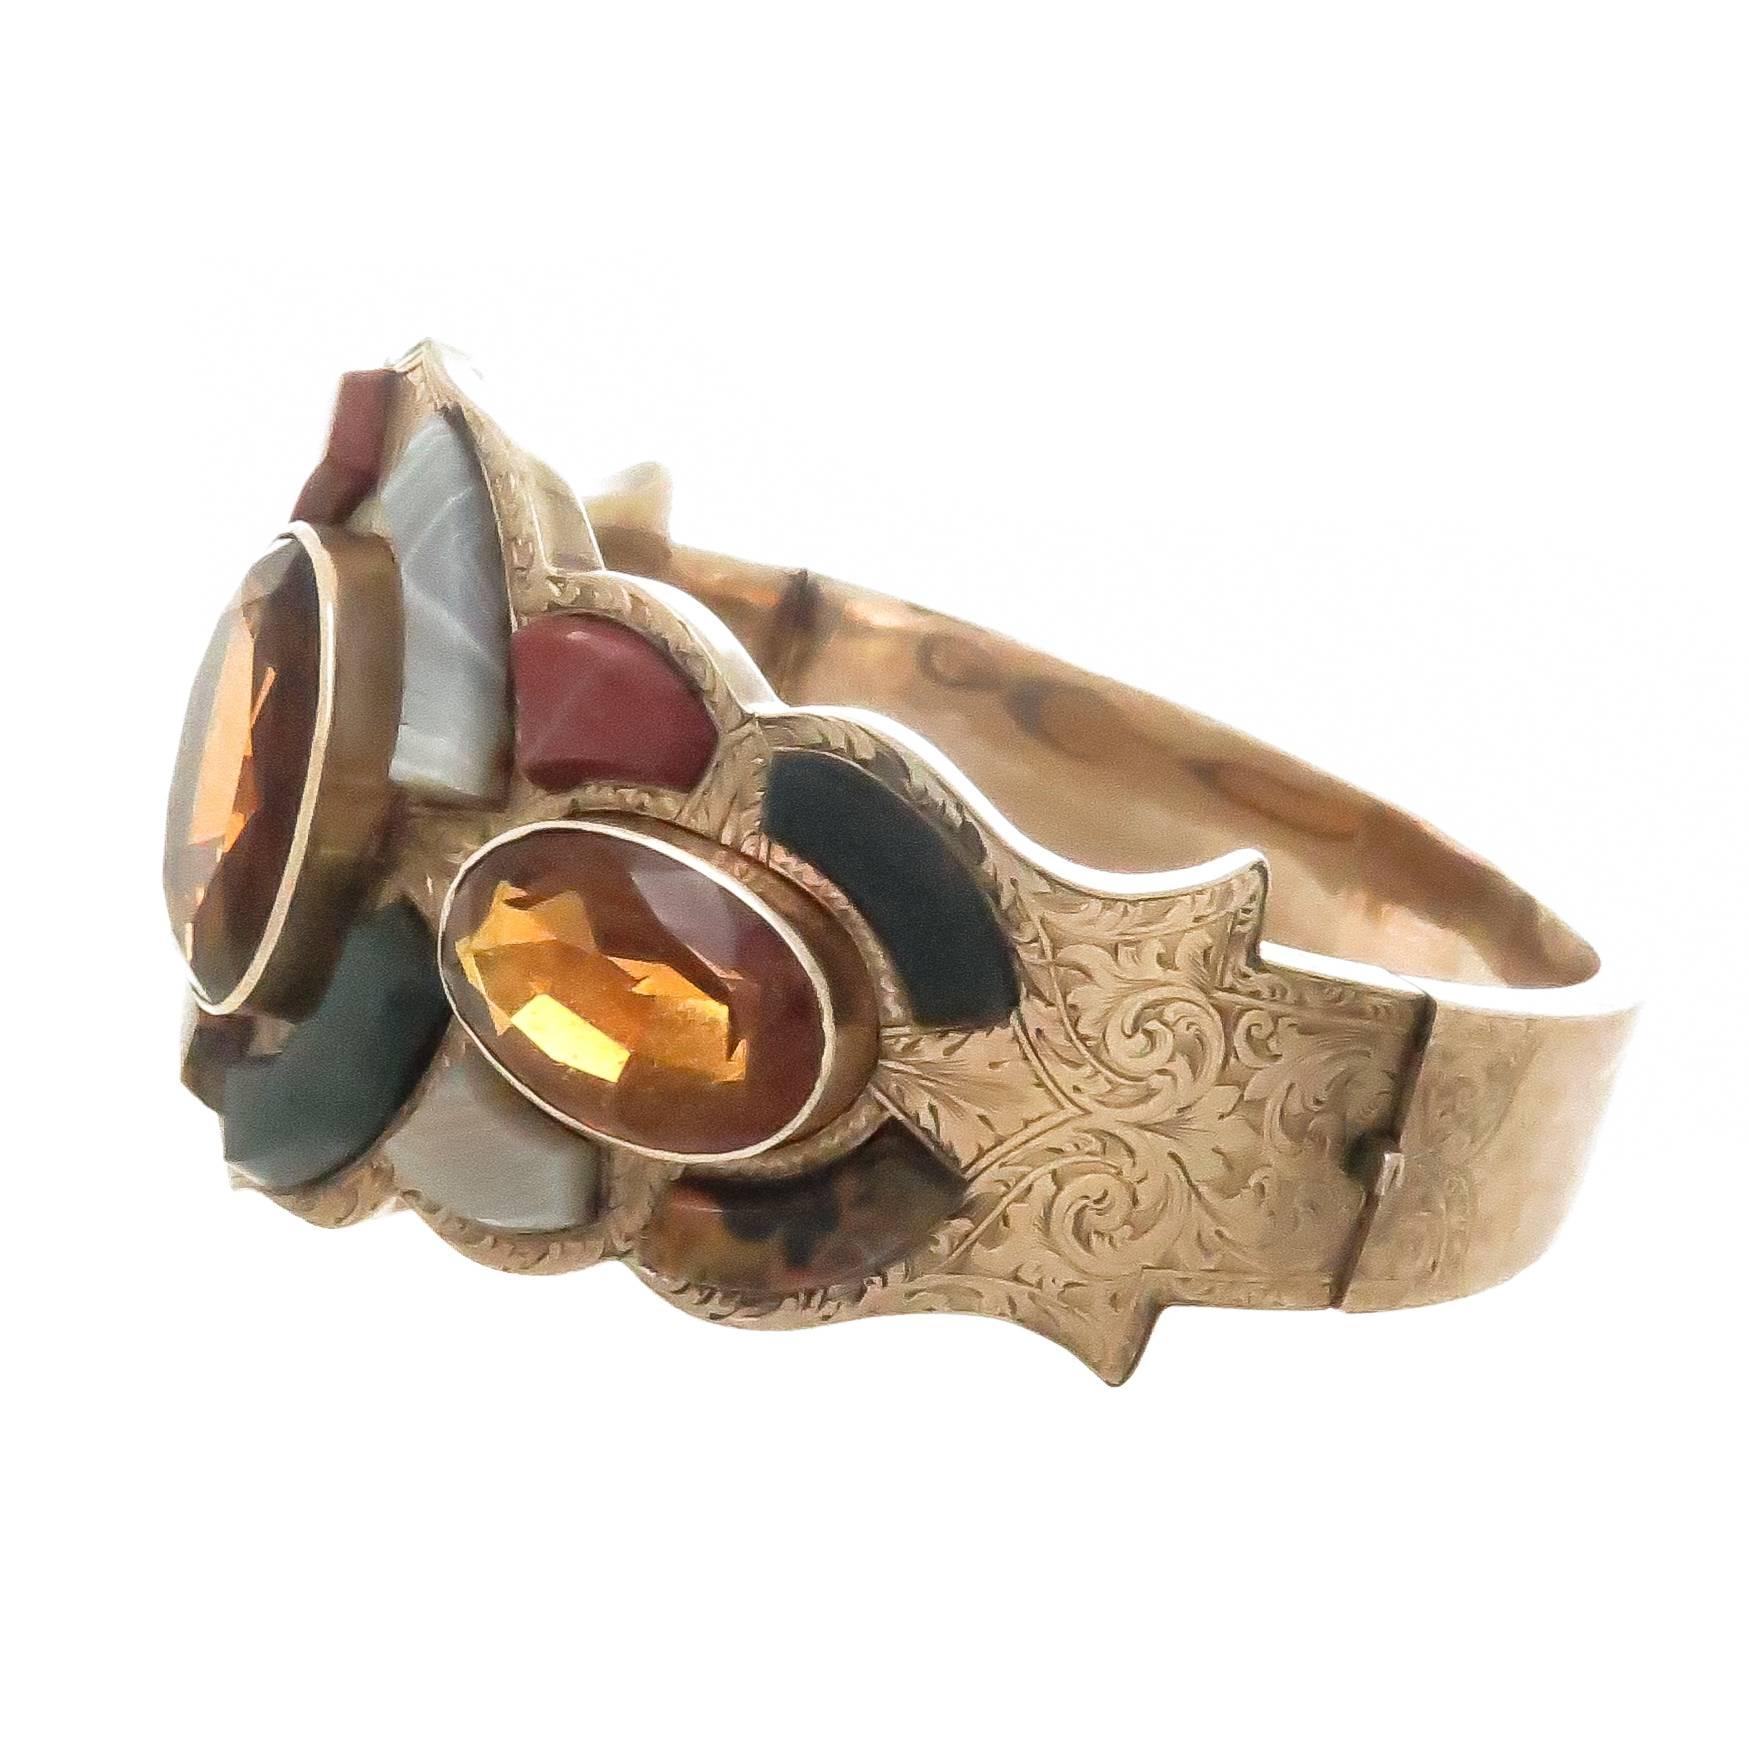 Circa 1890s Scottish 14K Rose Gold Bangle Bracelet, set with different colors of Scottish Agate stones and 3 fine color Oval Citrines. The Bracelet measures 1 1/2 inches wide at the very top with an inside wrist measurement of 6 1/2 inches.